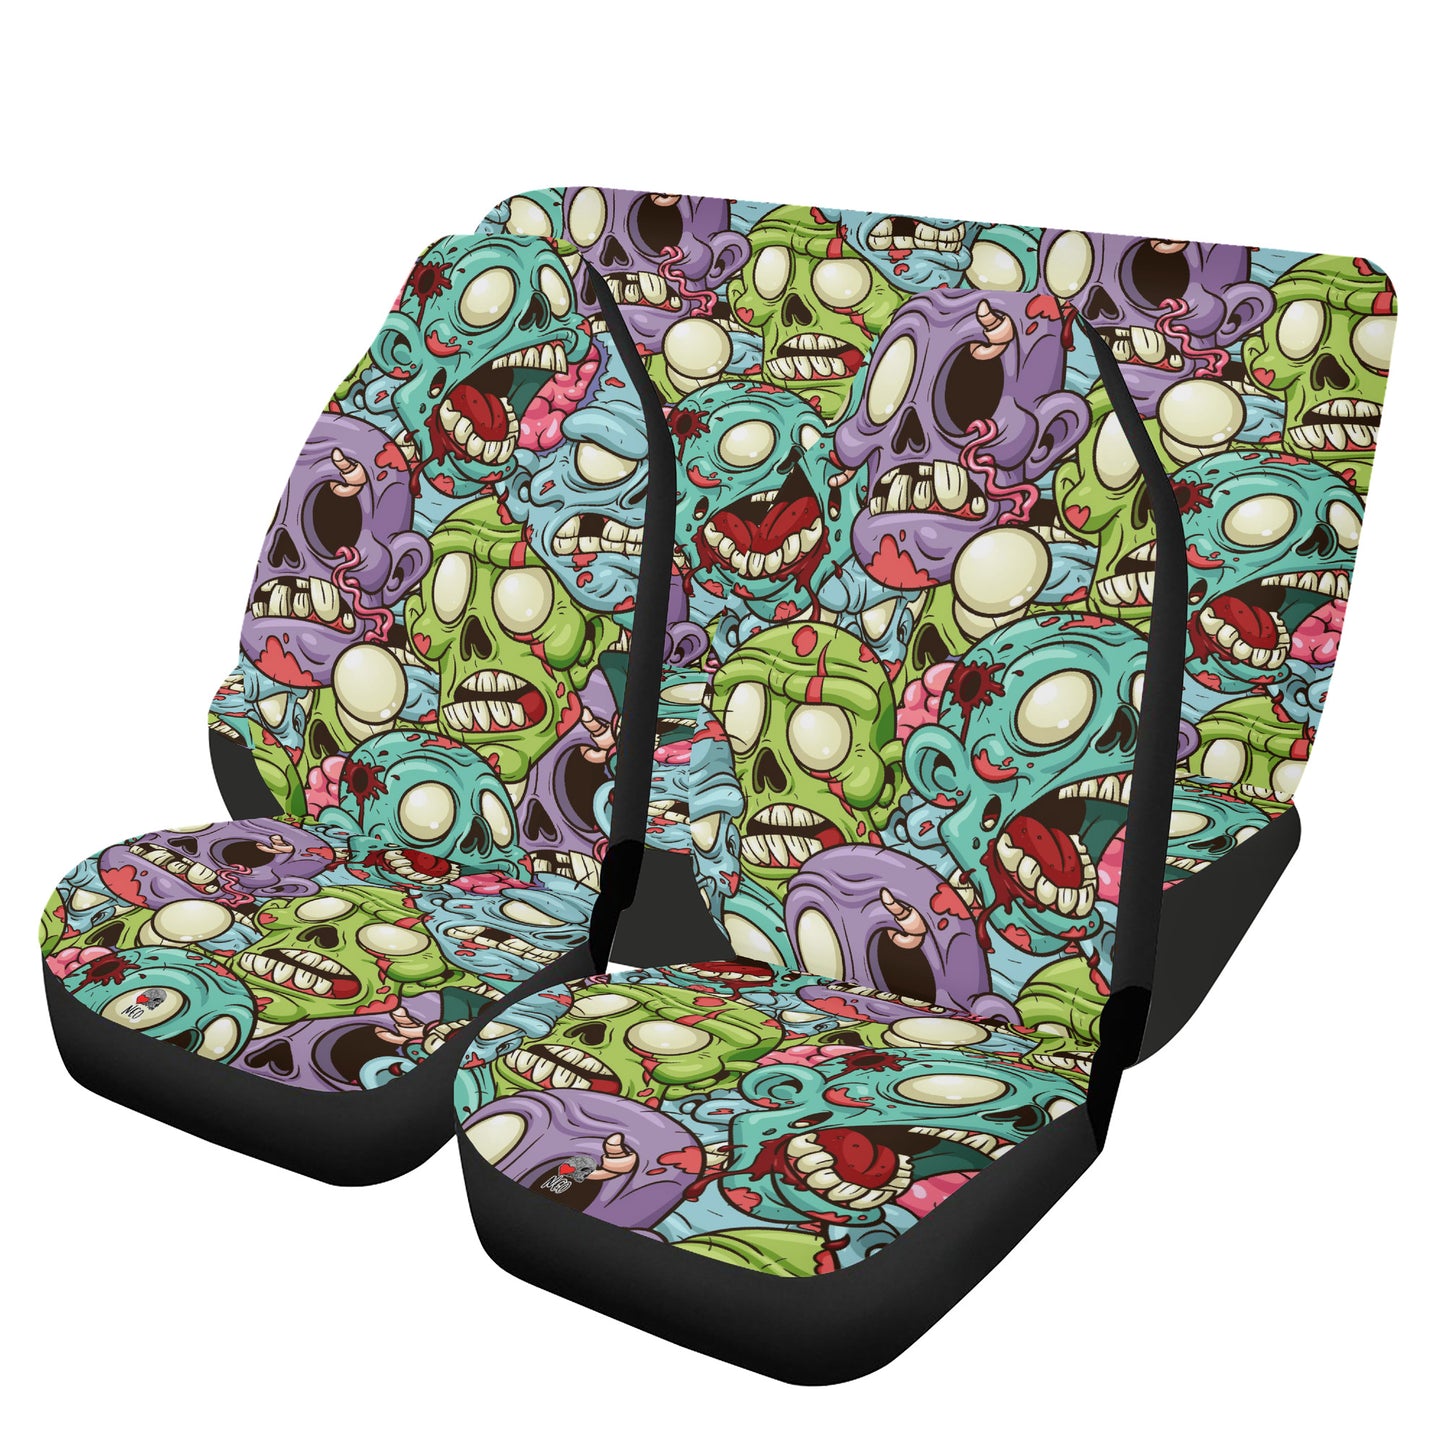 Zombie Crowd full Car Seat Cover Set